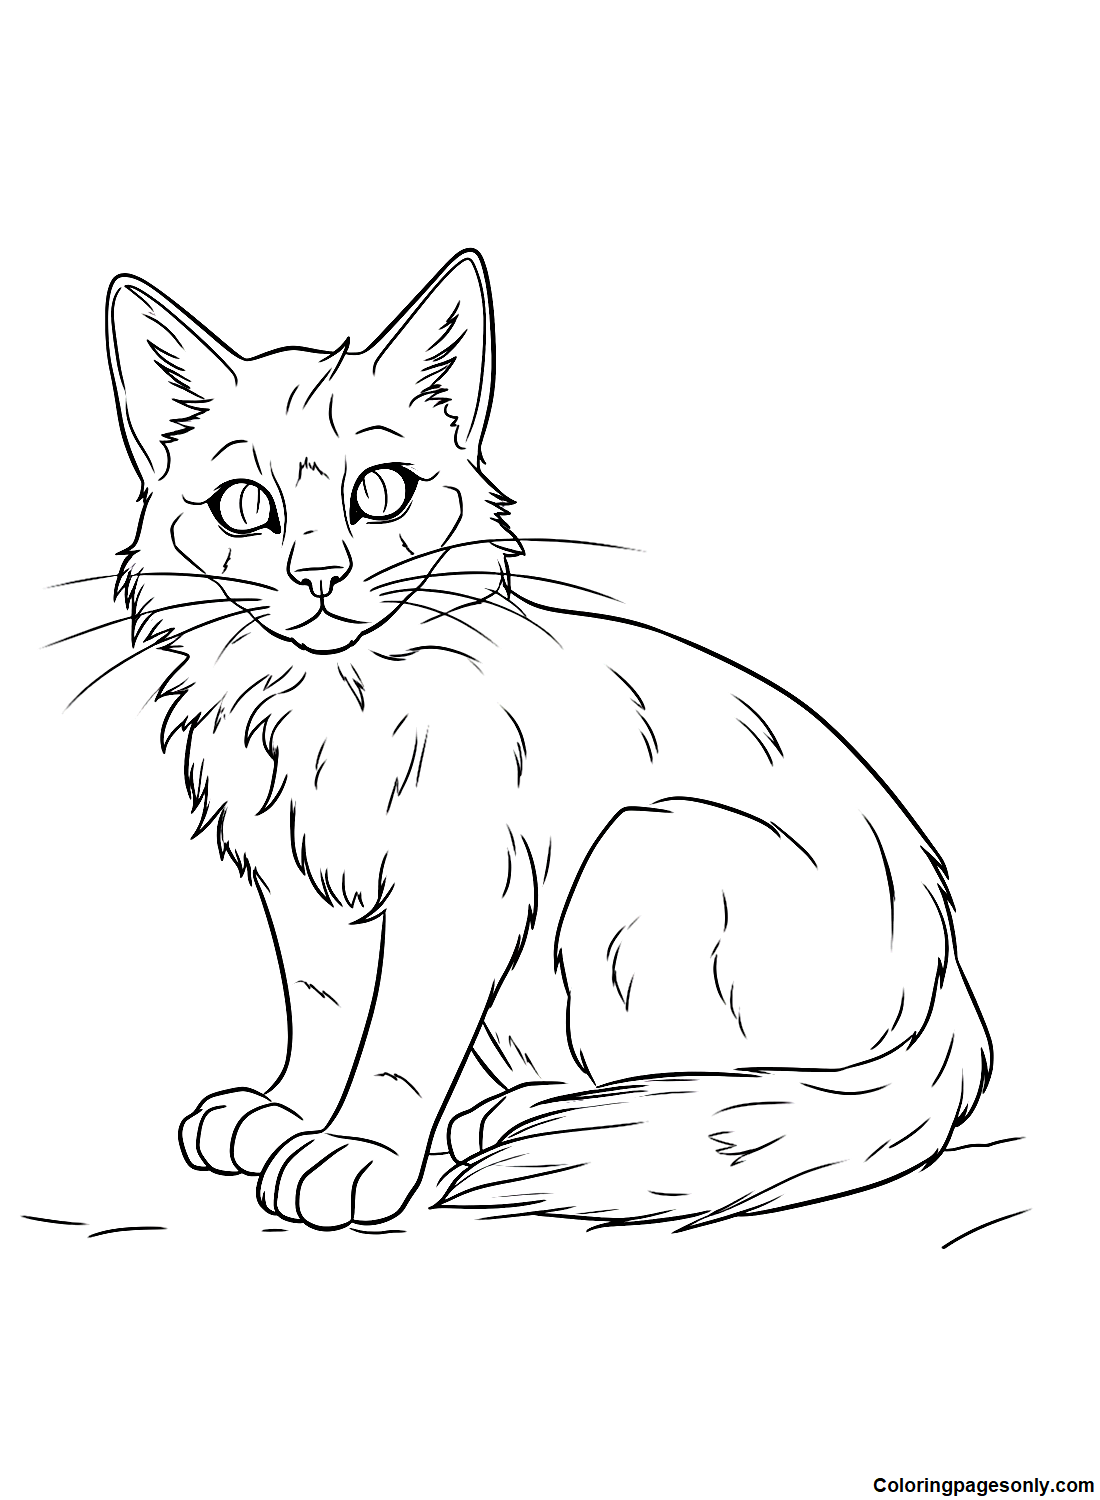 Squirrelflight from Warrior Cats Coloring Page